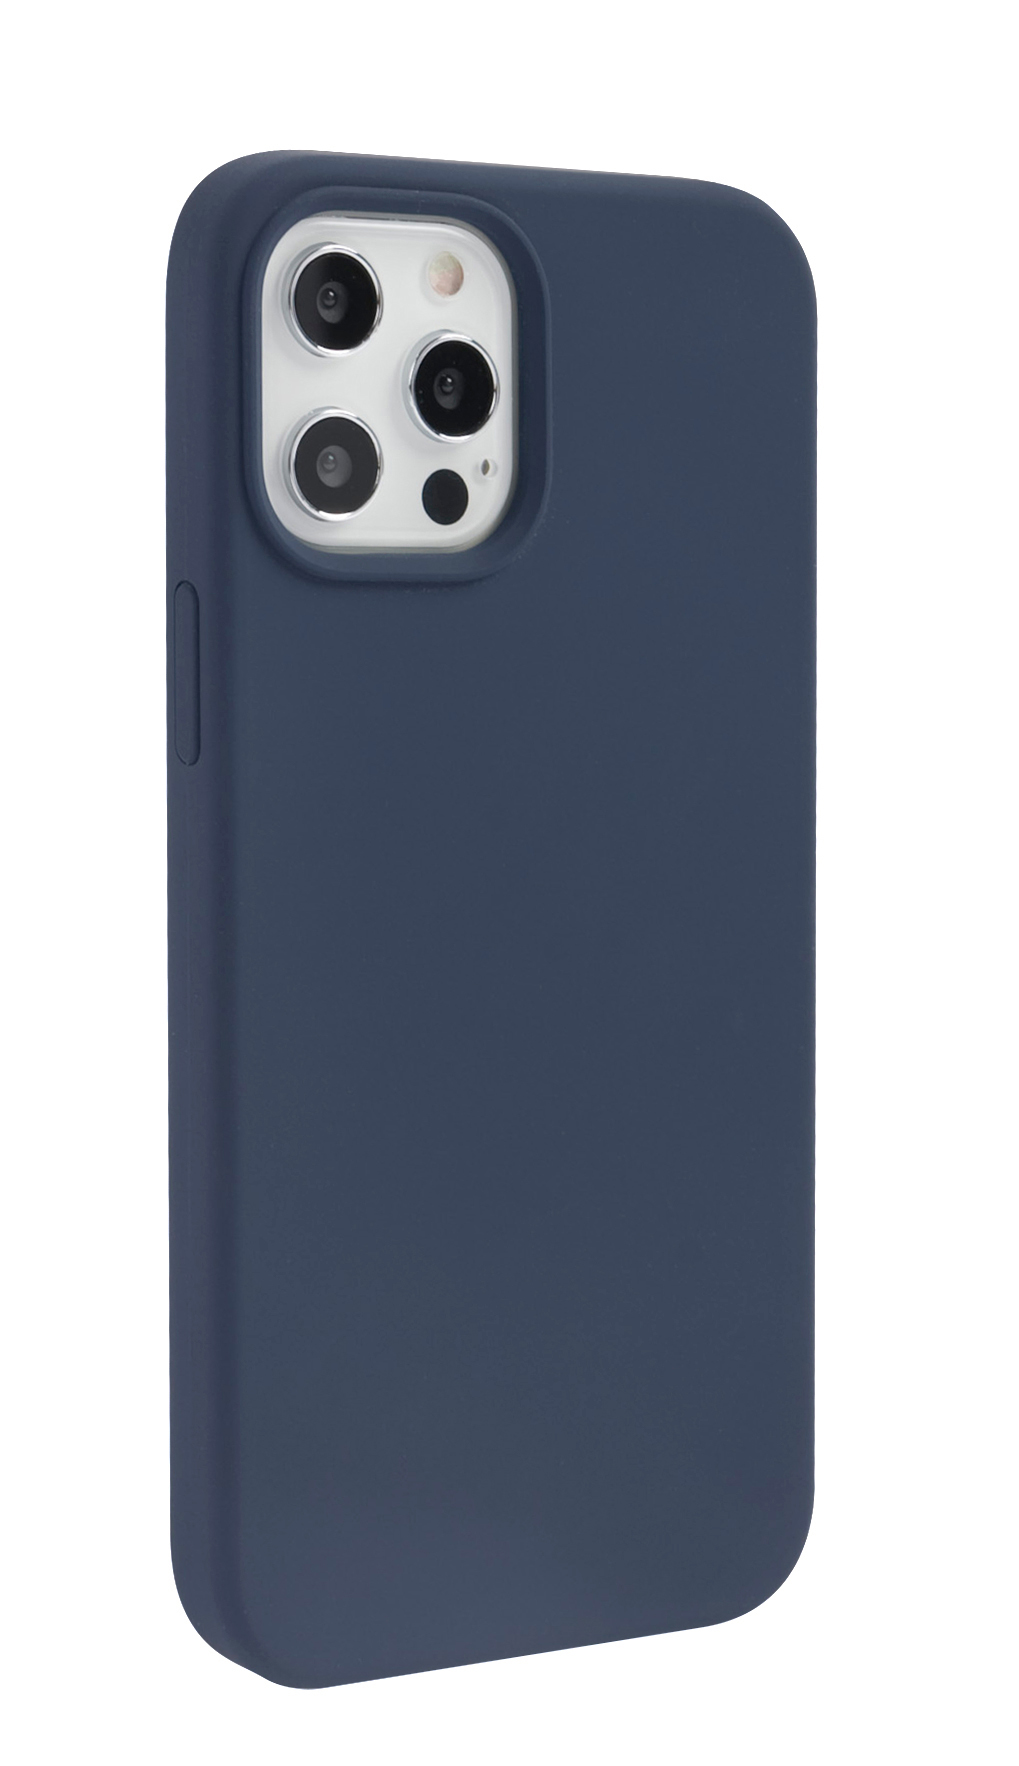 ISY ISC-2106, Apple, Backcover, Pro Blau Max, iPhone 12